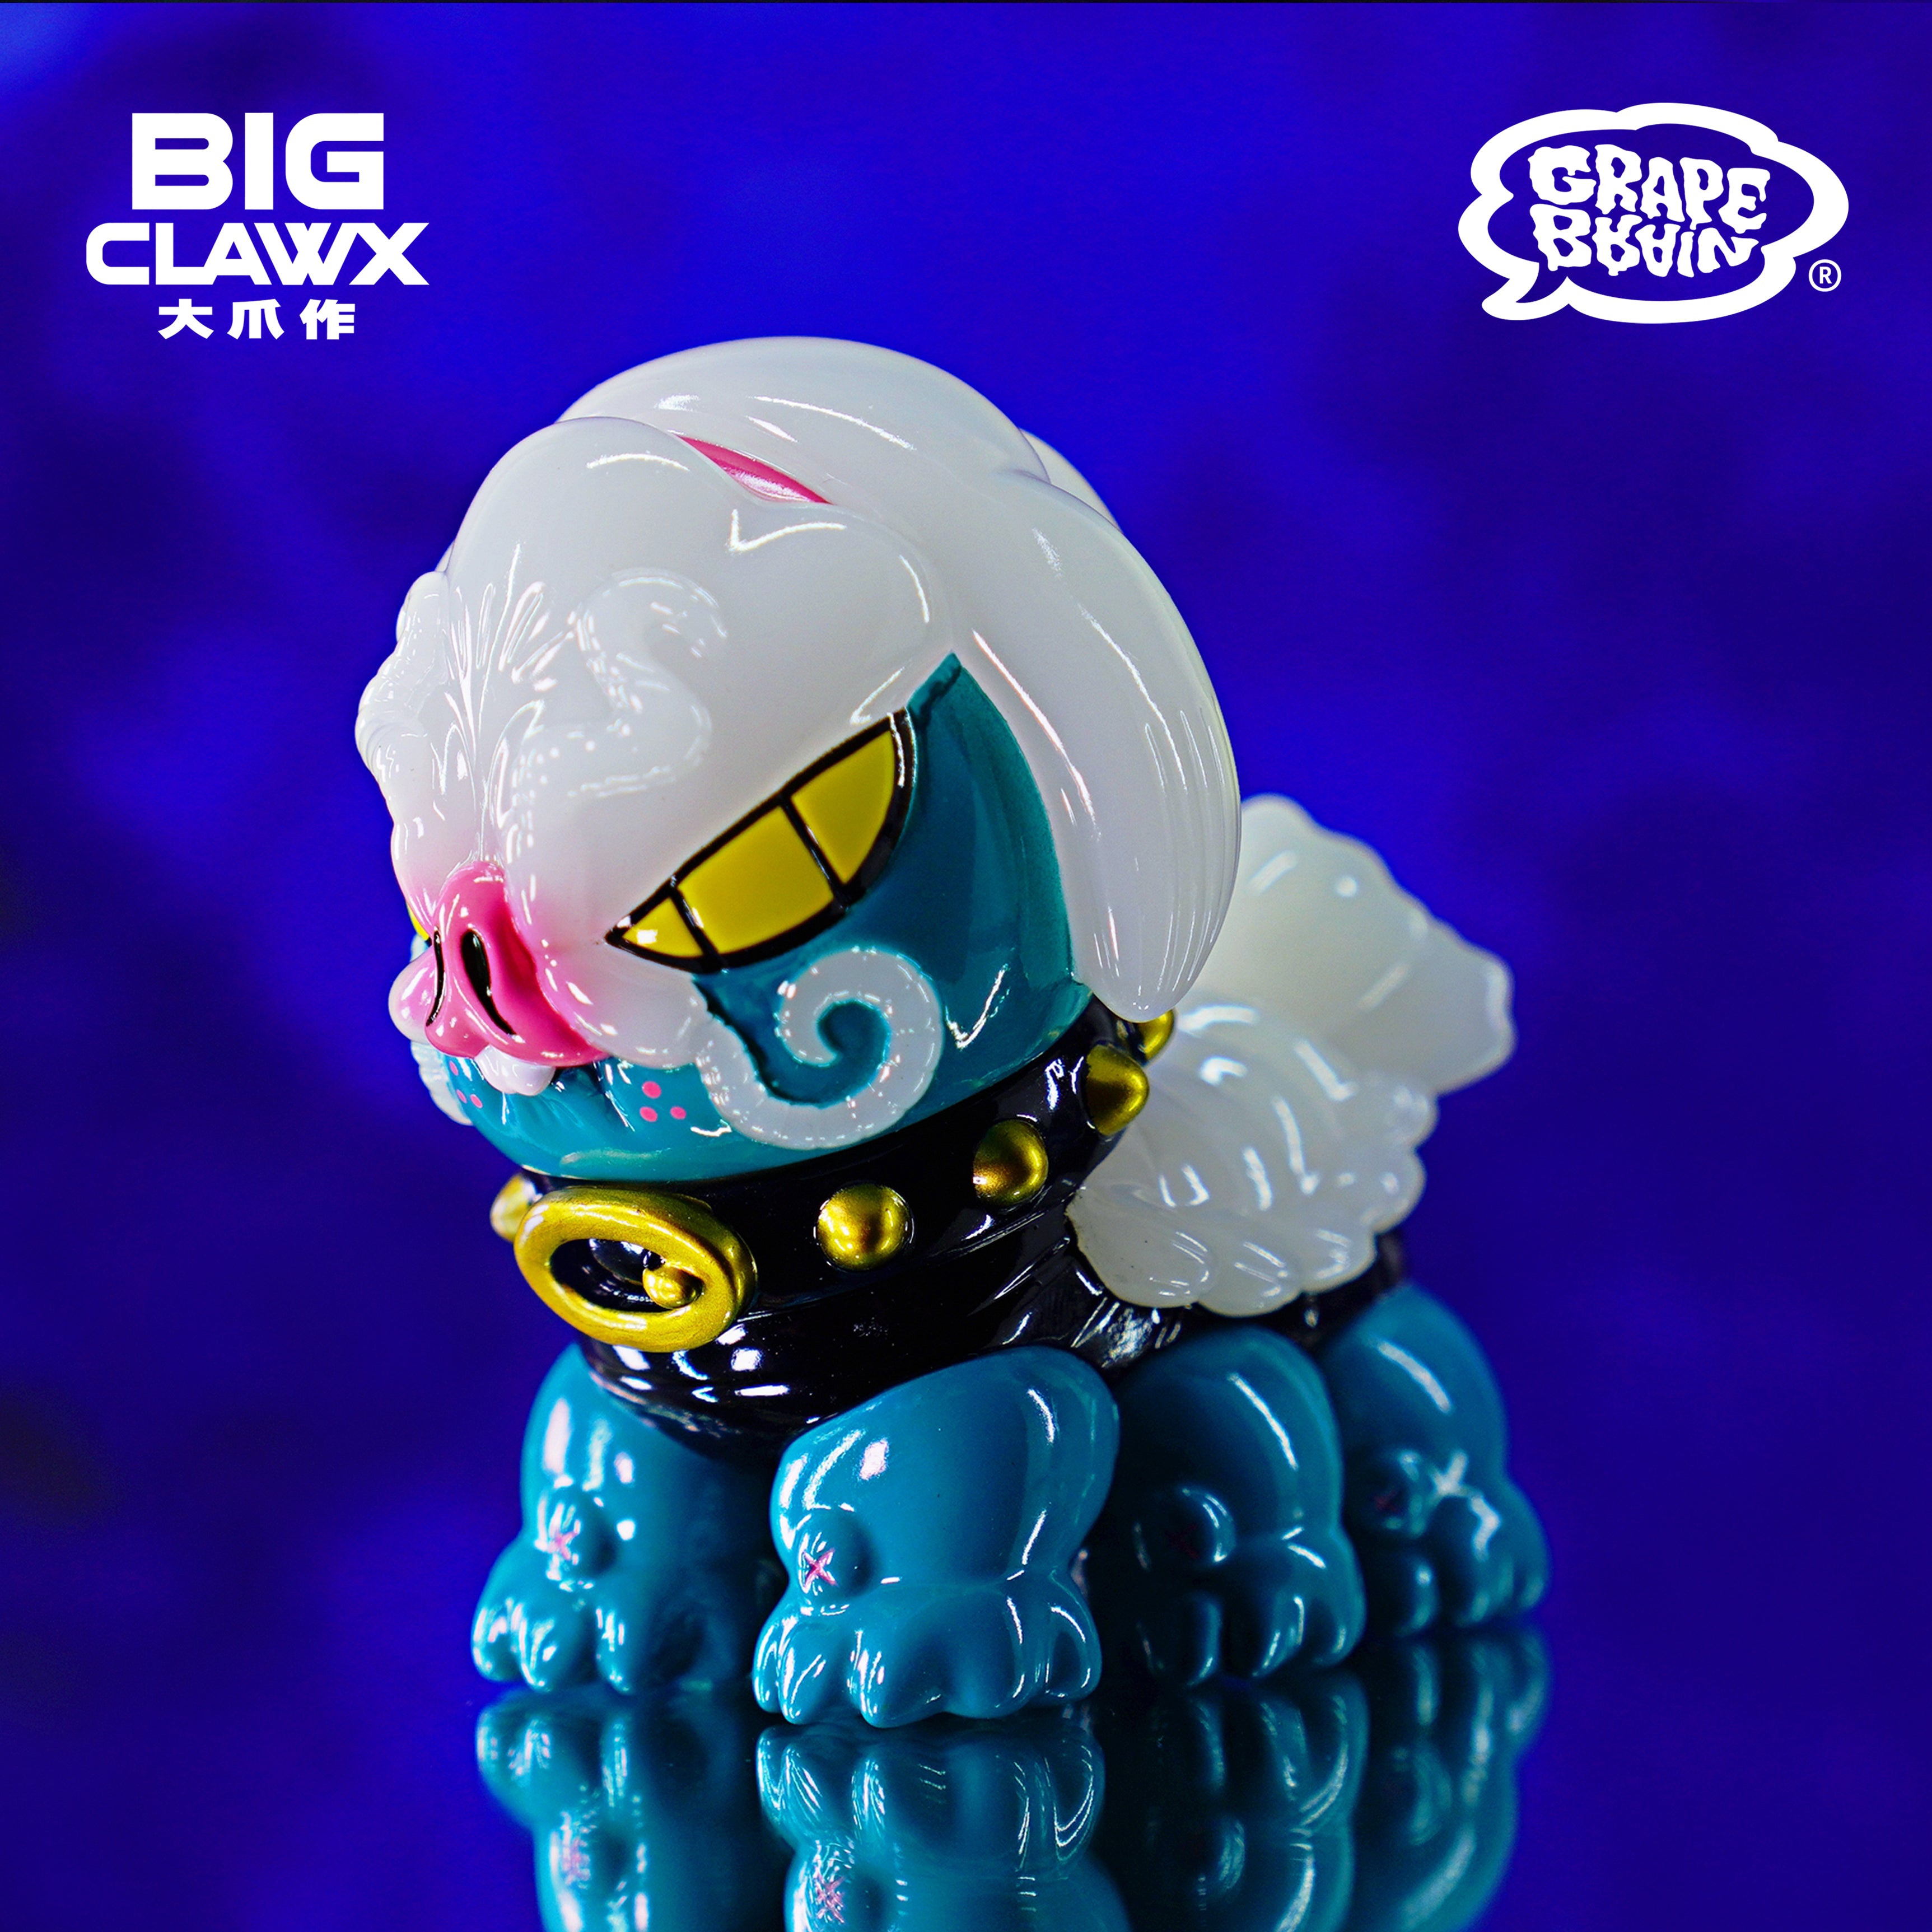 A soft vinyl toy featuring a cartoon octopus character, part of the Cola - GID Blue by BigClaw x Grape Brain collection.